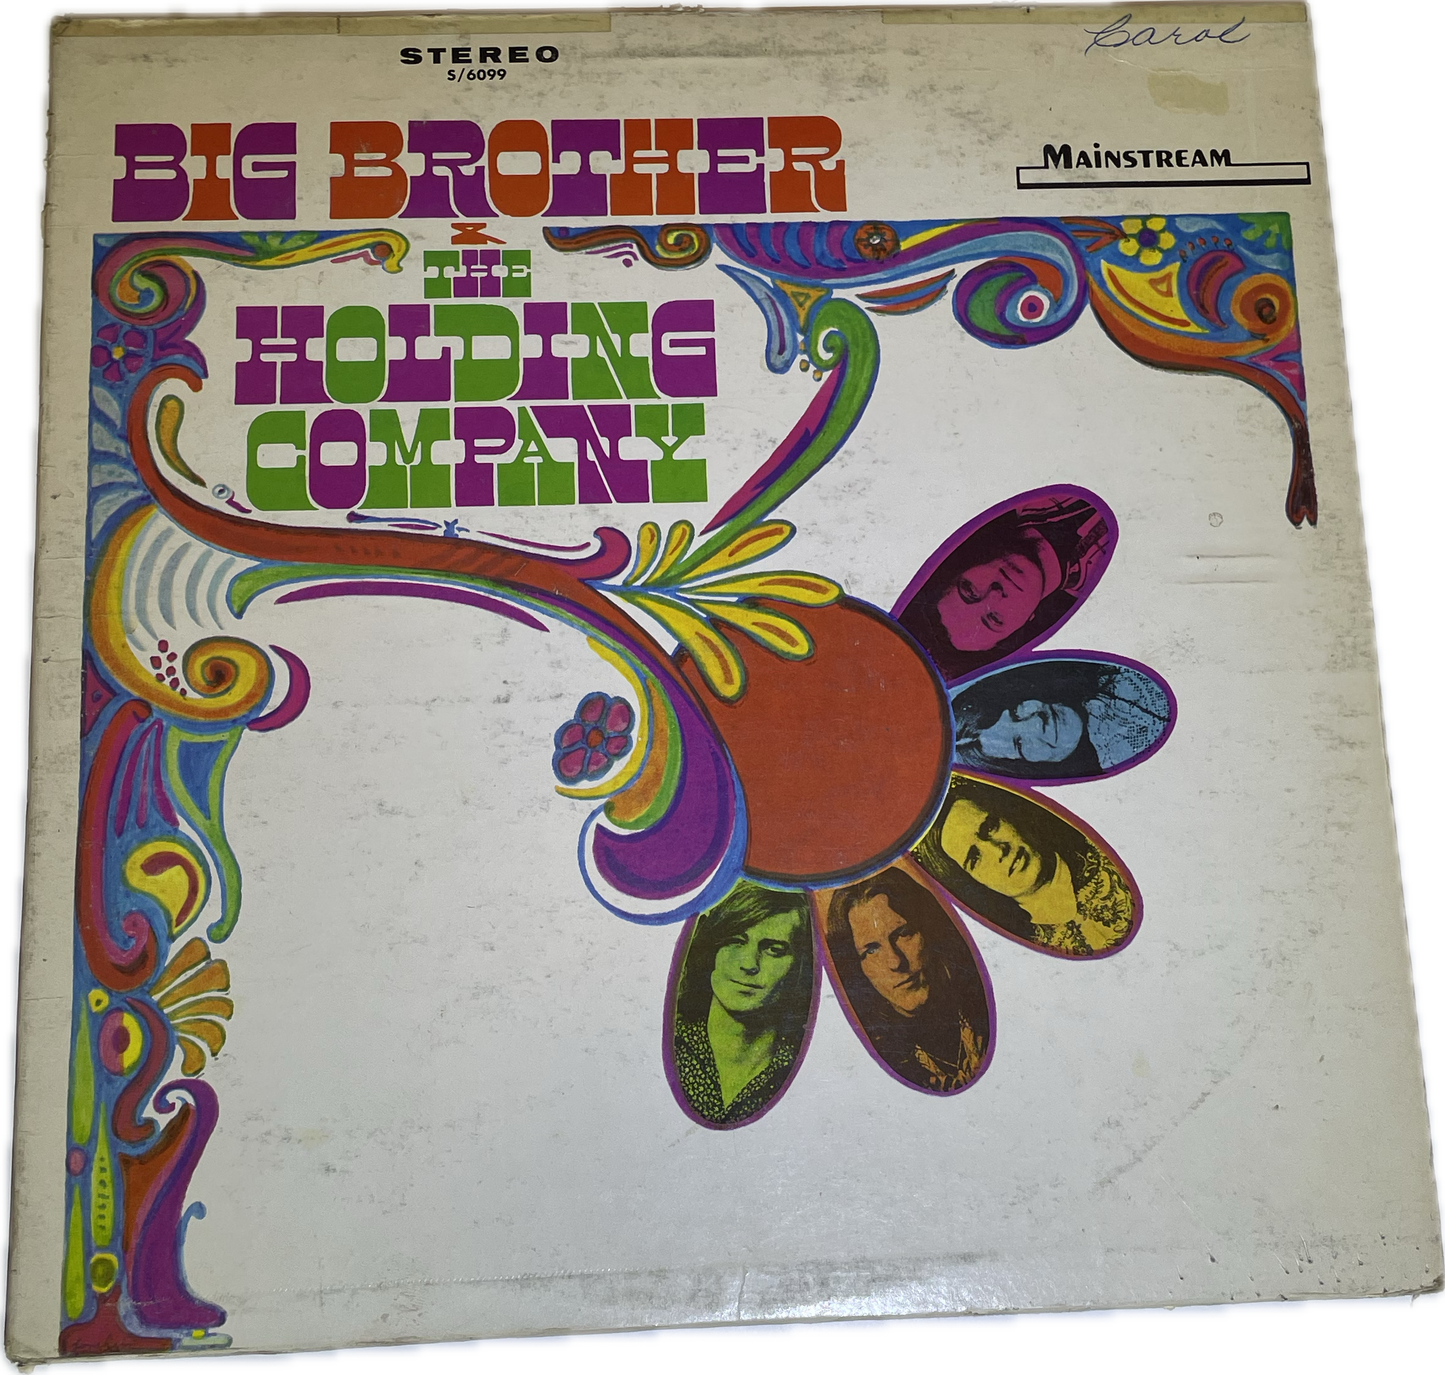 G G+ Janis Joplin Big Brother and the Holding Company s/t self titled Vinyl LP